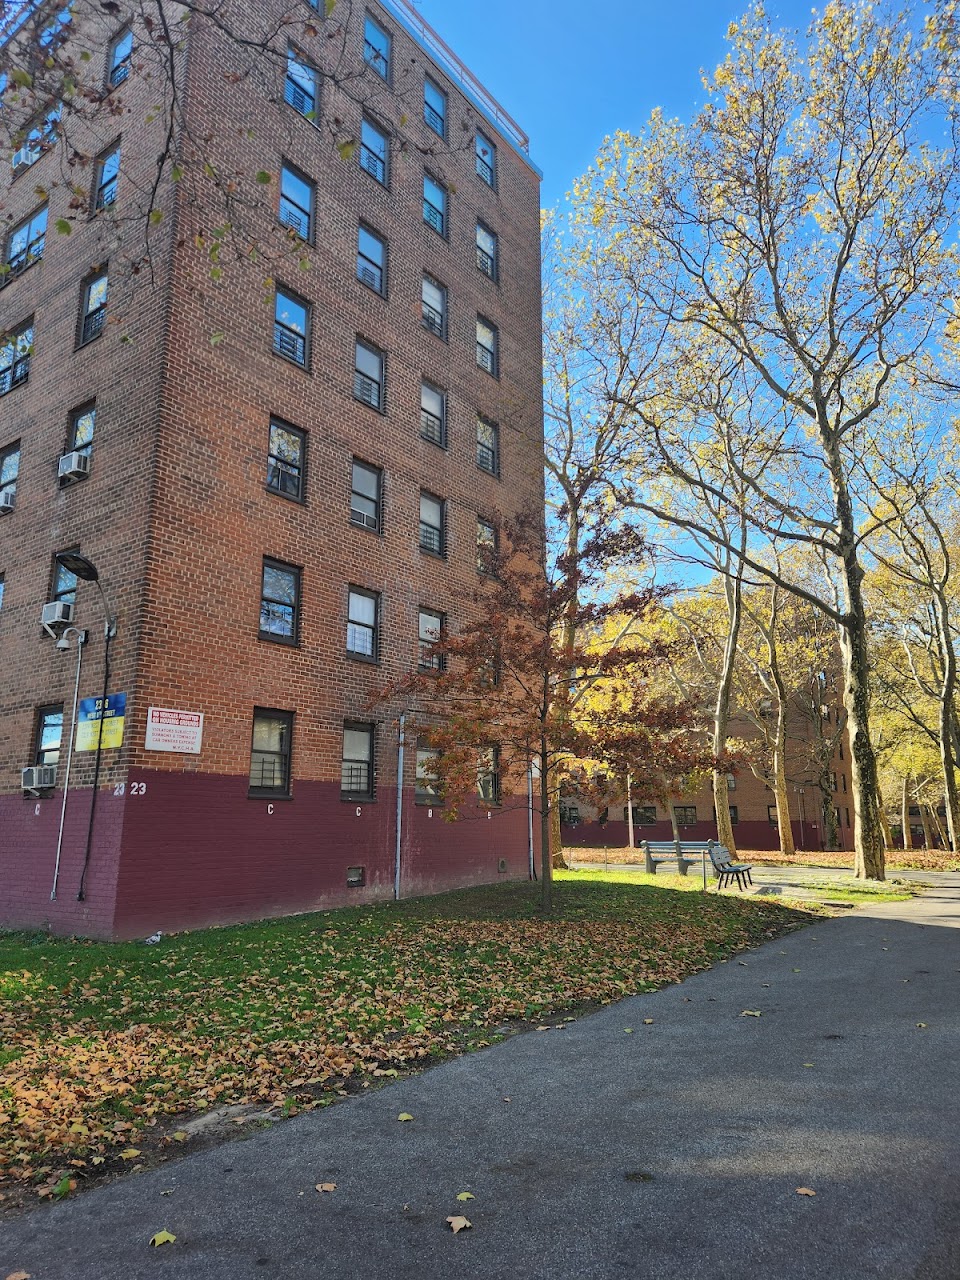 Photo of MARLBORO HOUSES. Affordable housing located at 29 AVENUE W BROOKLYN, NY 11223